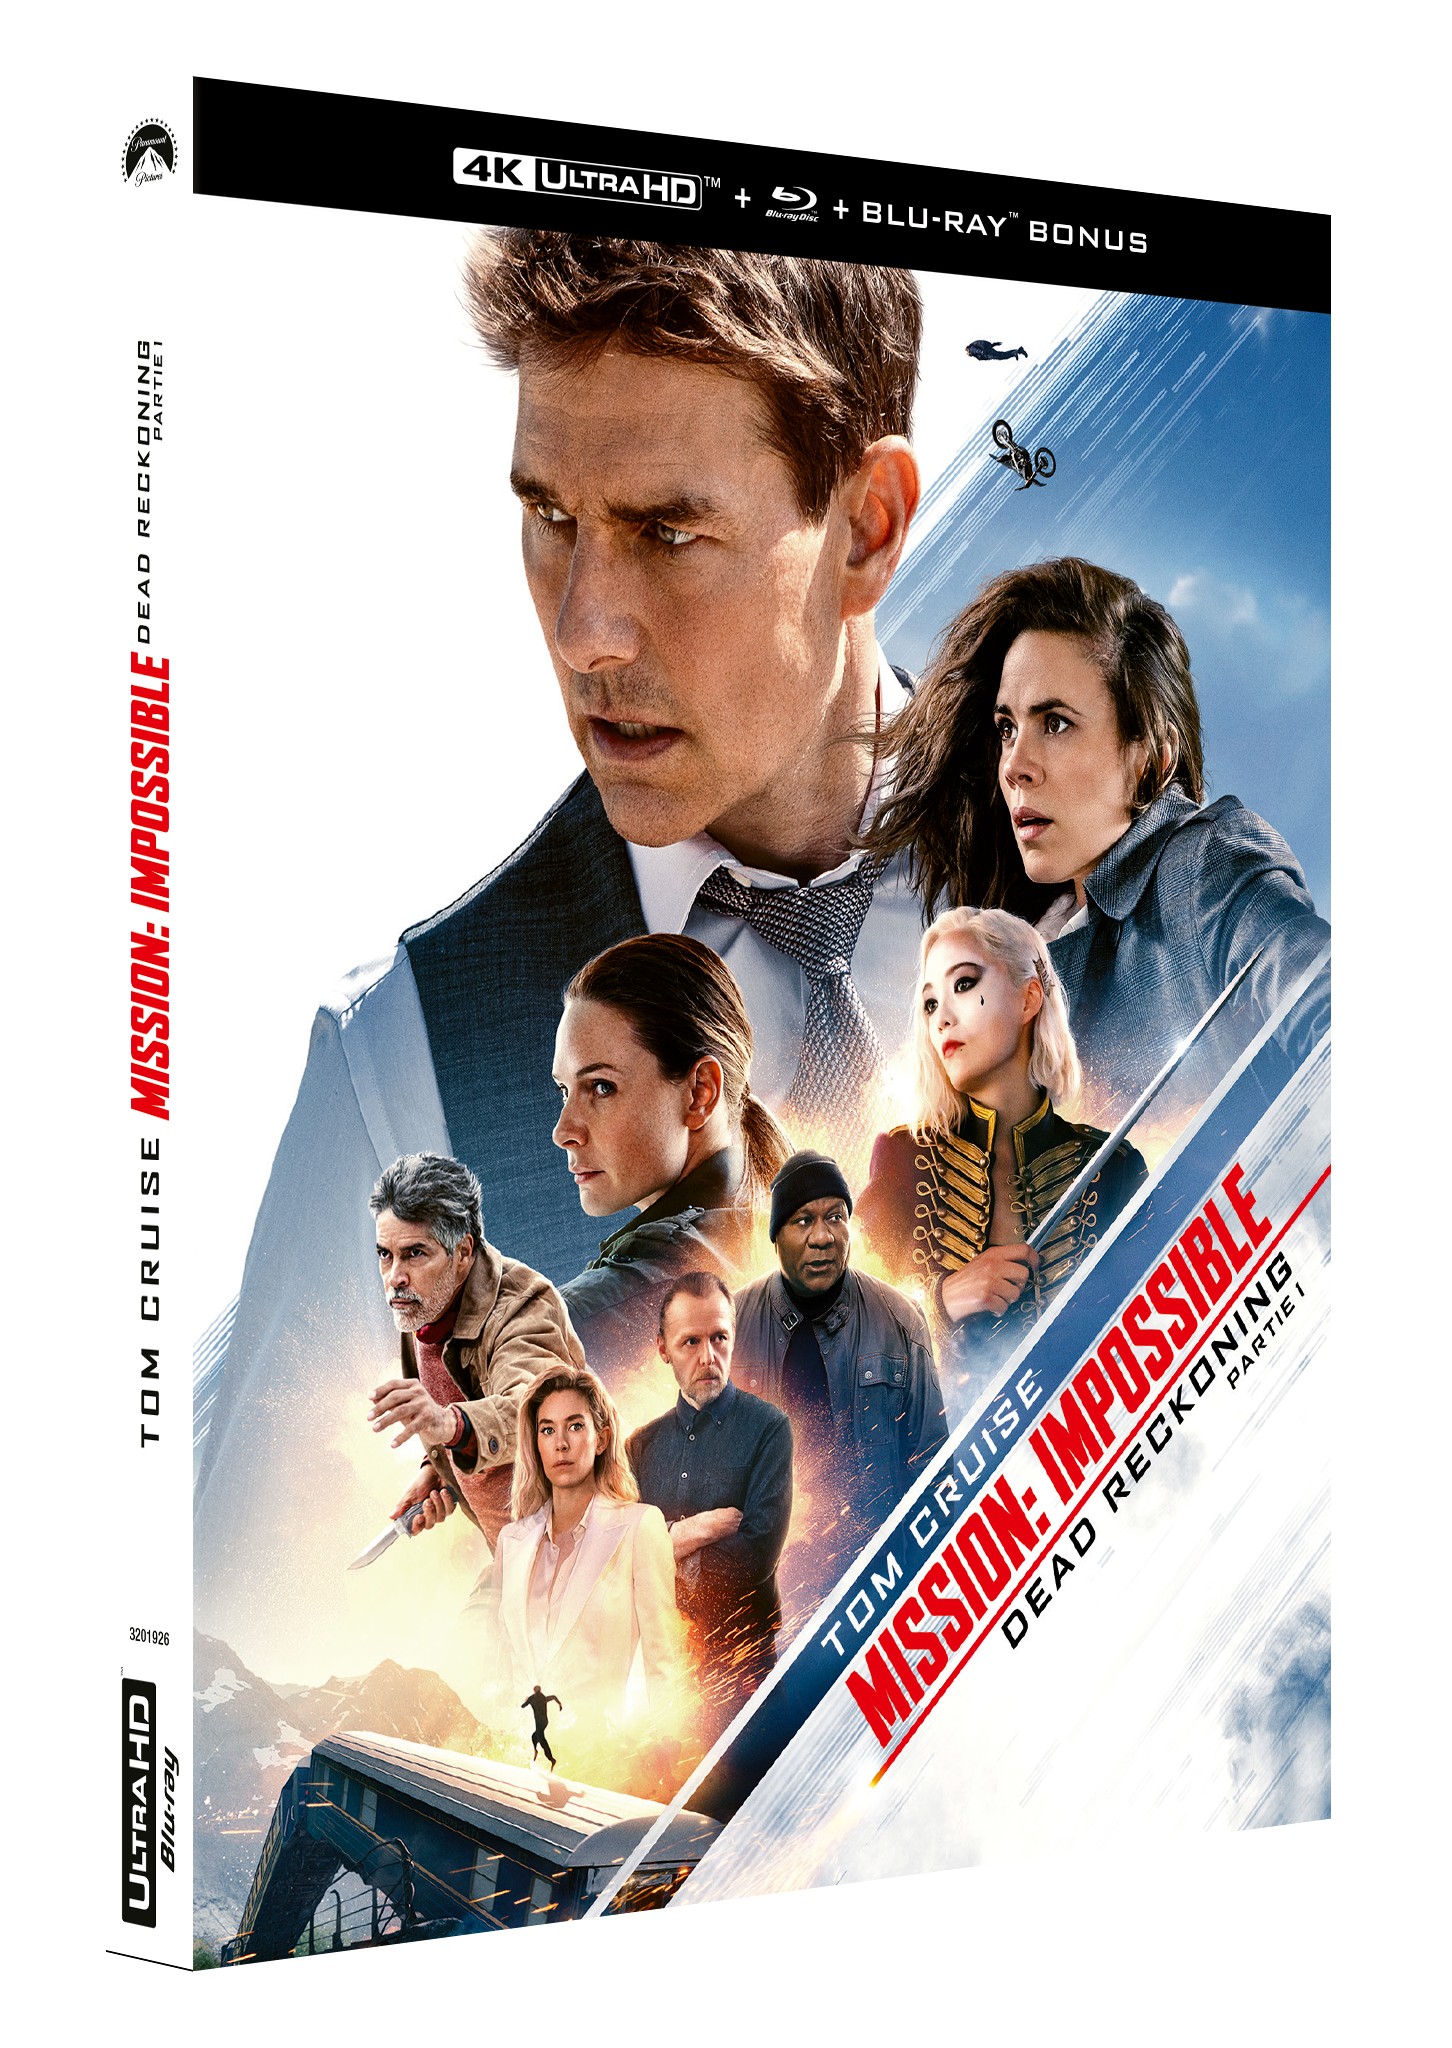 MISSION IMPOSSIBLE : DEAD RECKONING PART. 1 - DVD